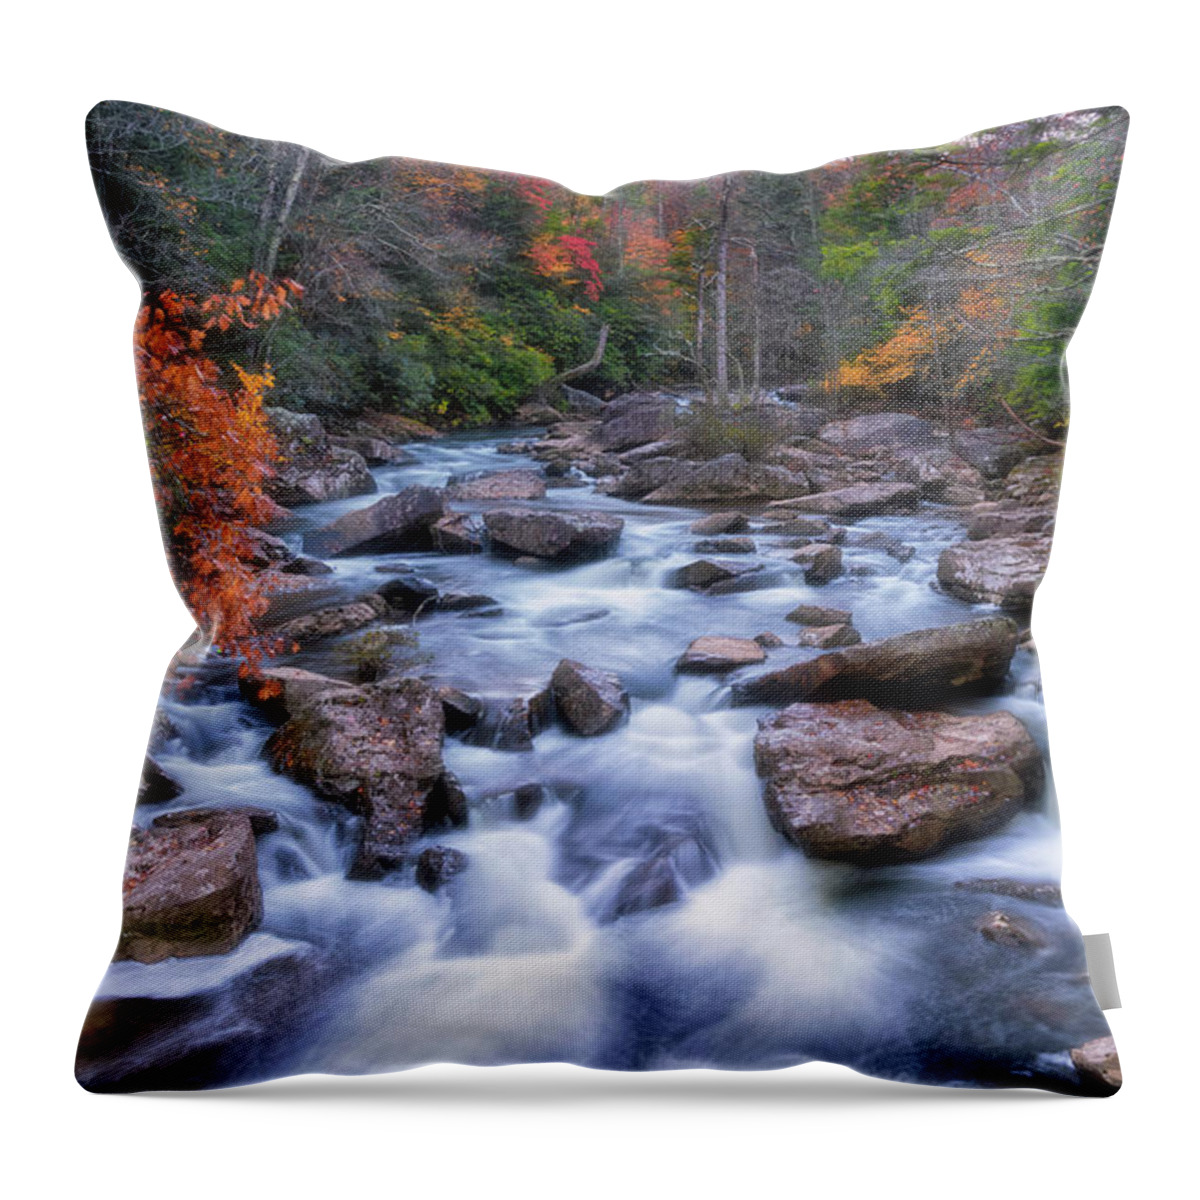 Fall Flow Throw Pillow featuring the photograph Fall Flow by Russell Pugh